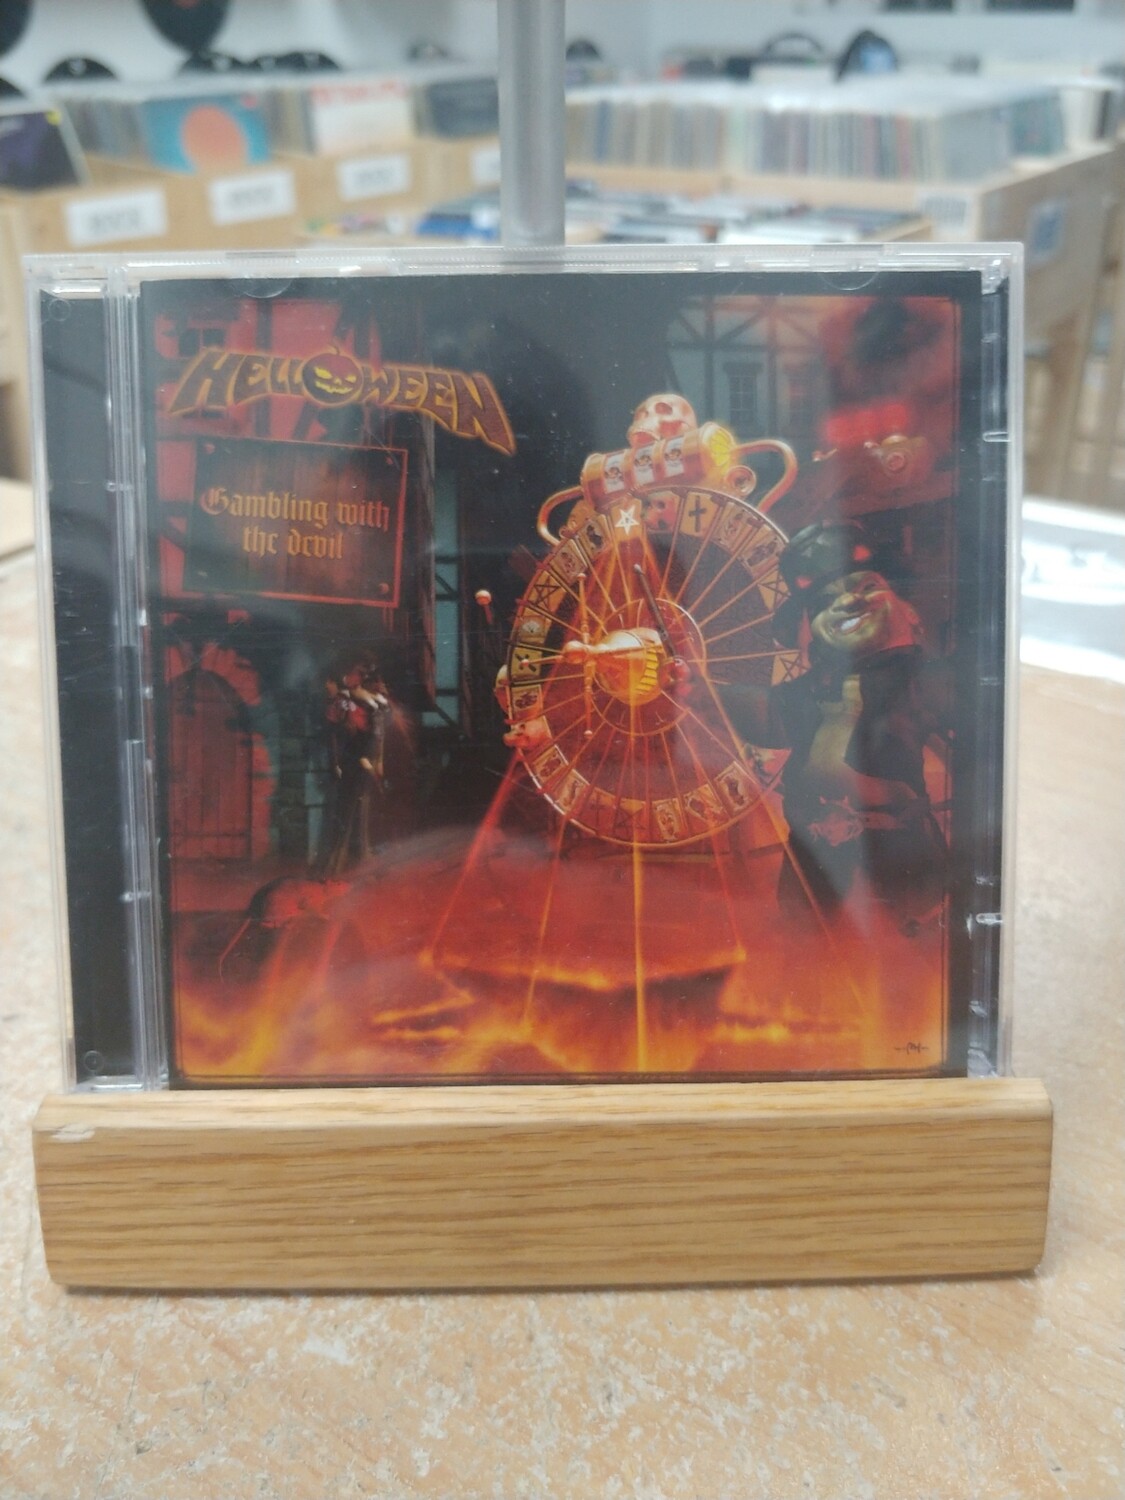 Helloween - Gambling with the devil (CD)